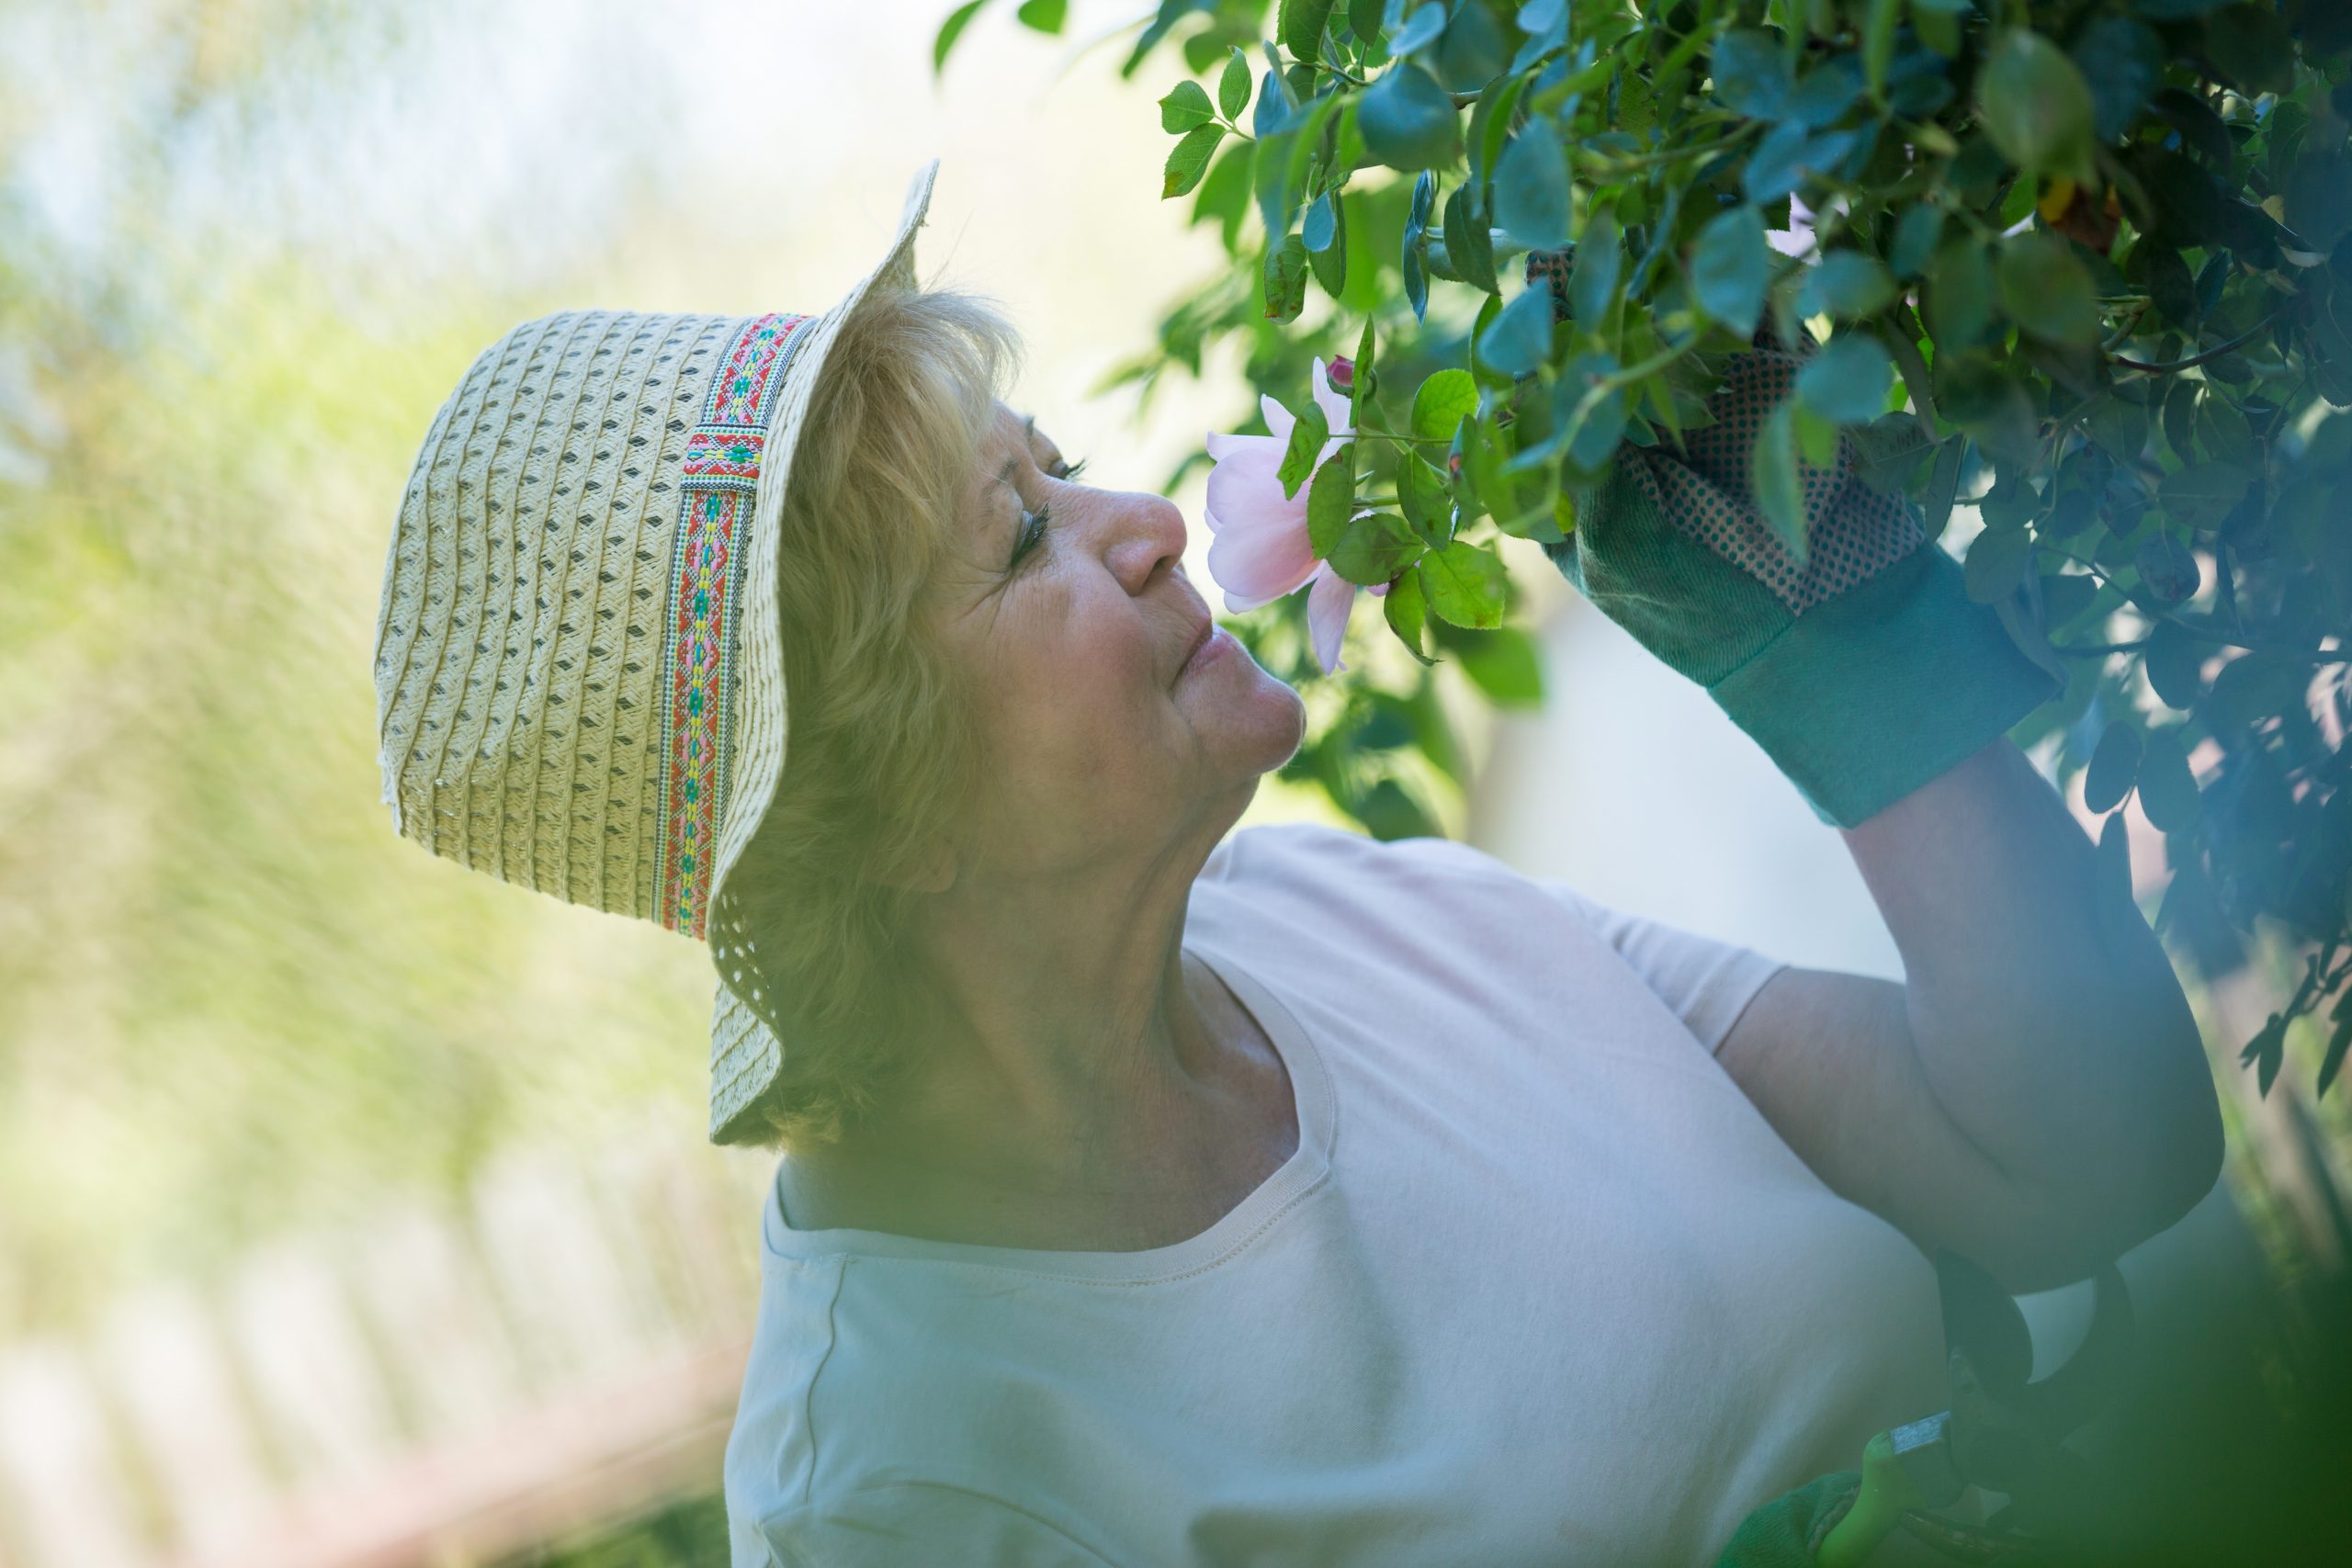 Sensory gardens and their benefits for the elderly in care